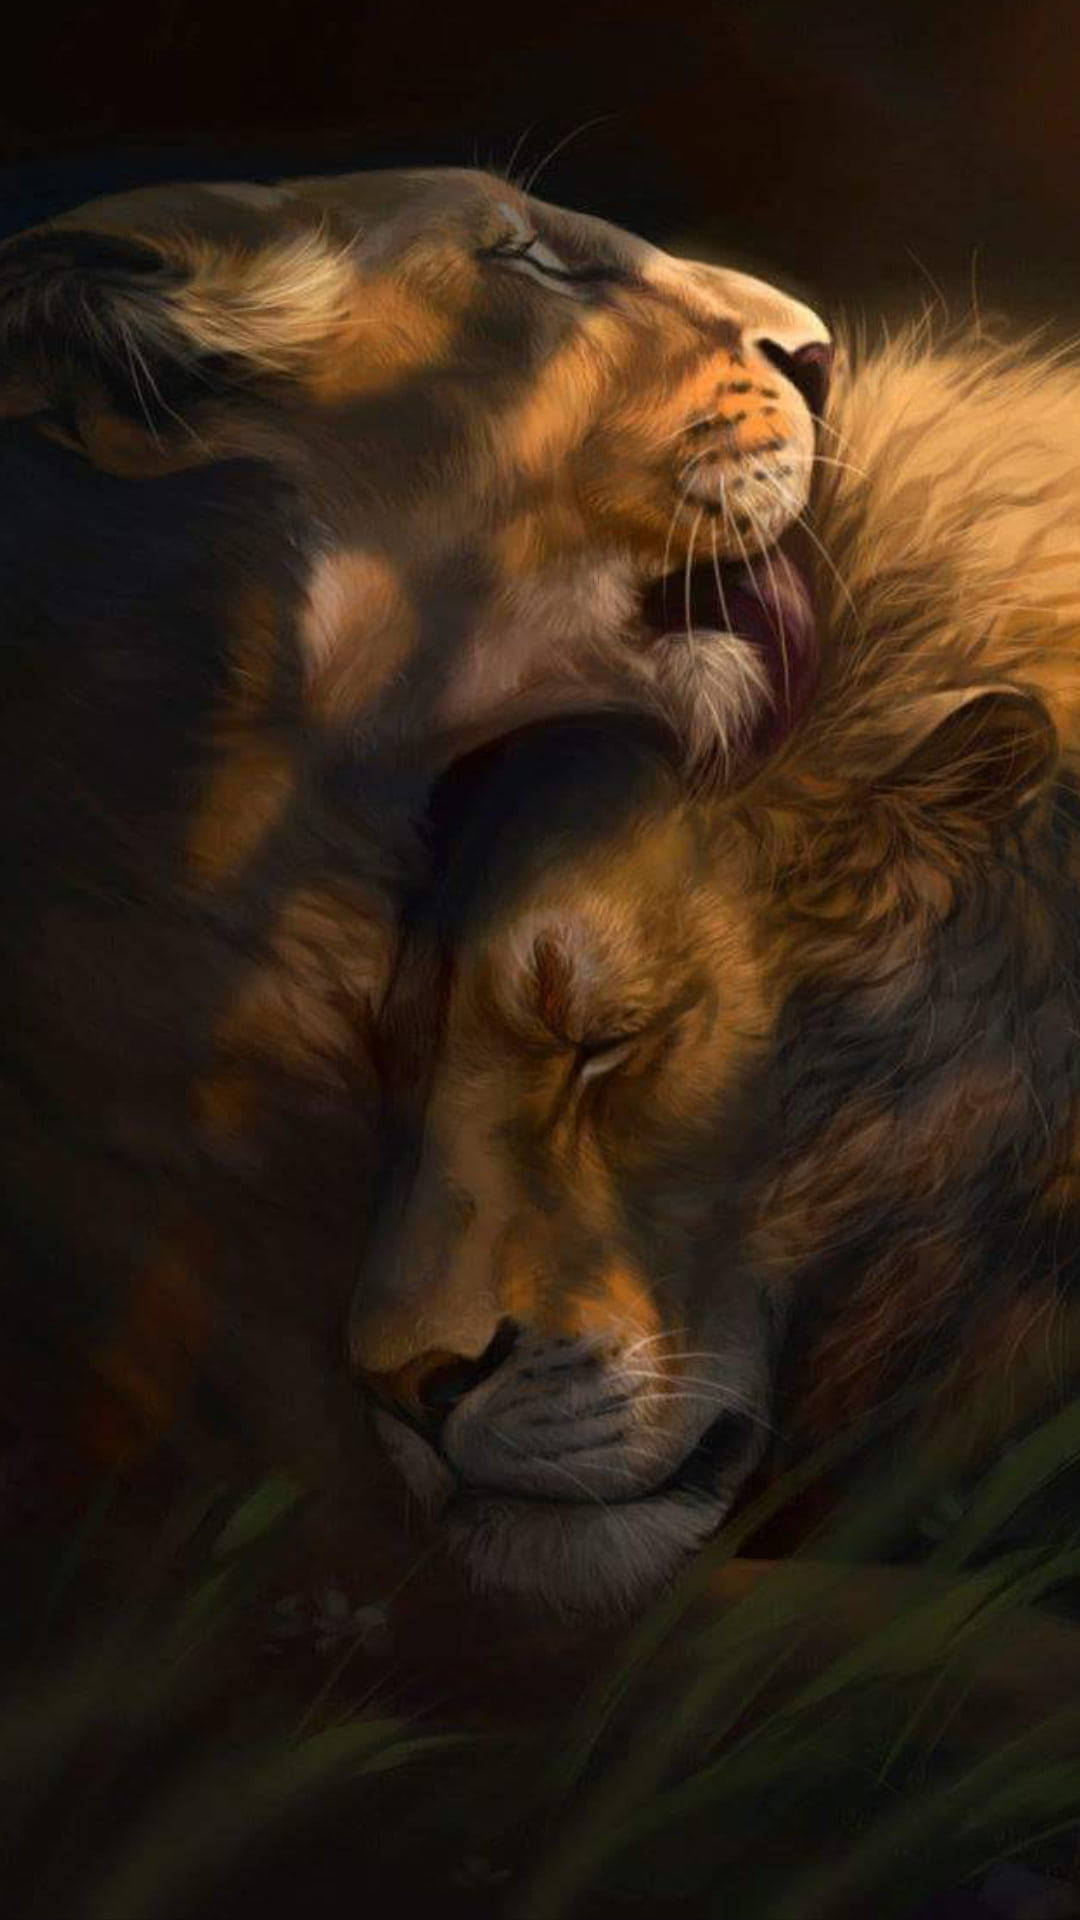 Lioness And Lion Phone Wallpaper